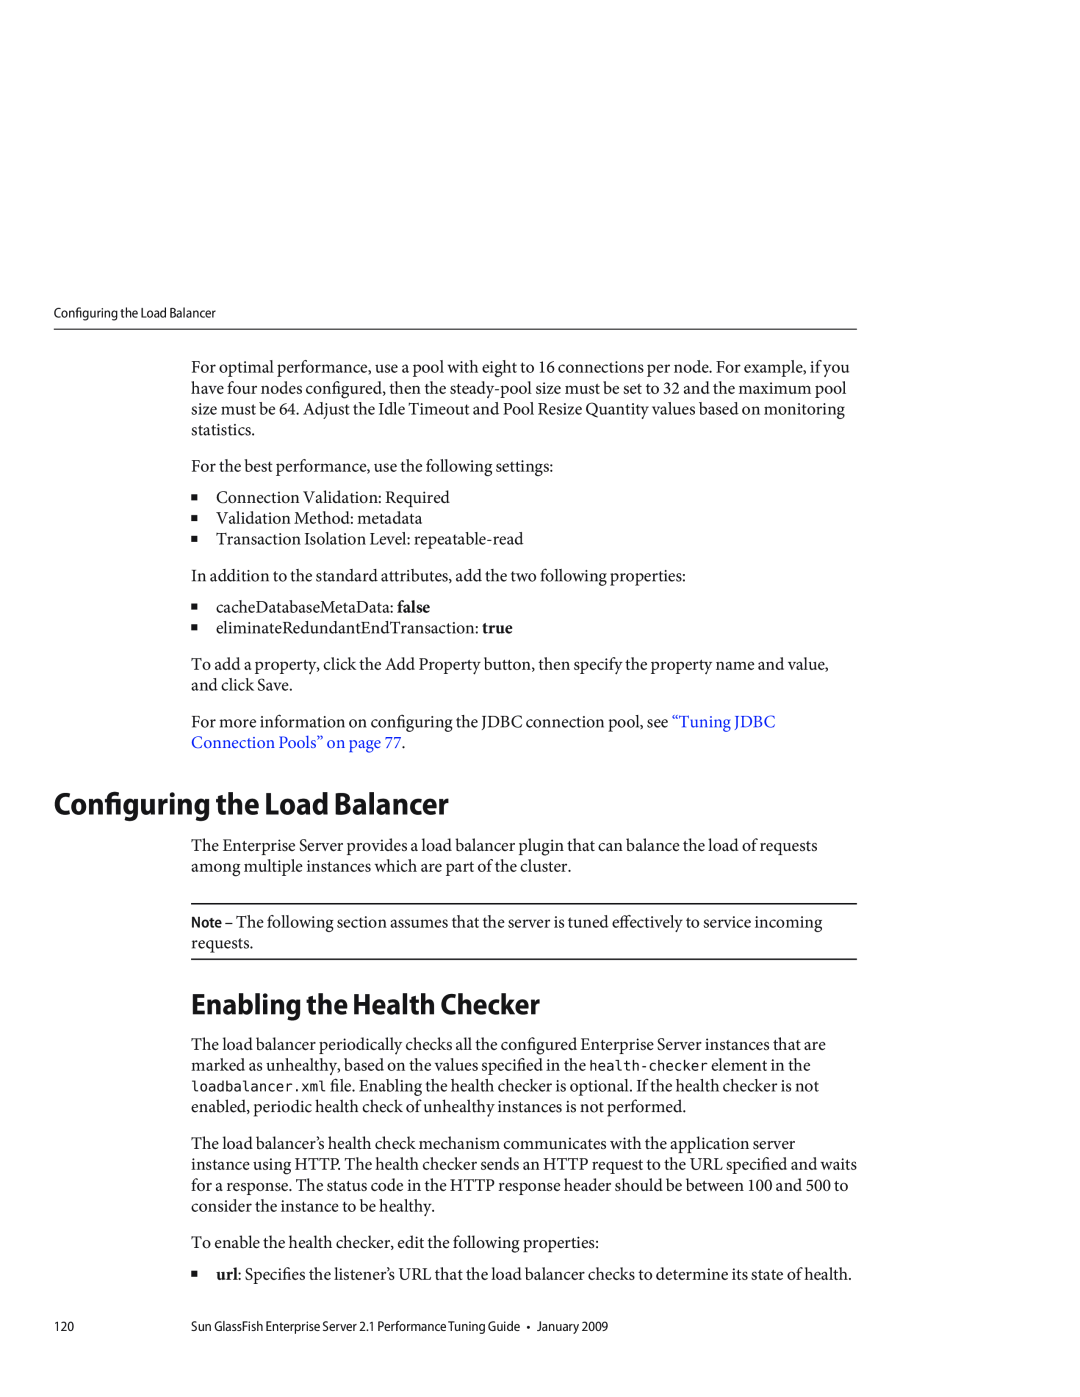 Sun Microsystems 820434310 manual Configuring the Load Balancer, Enabling the Health Checker, Connection Pools” on page 